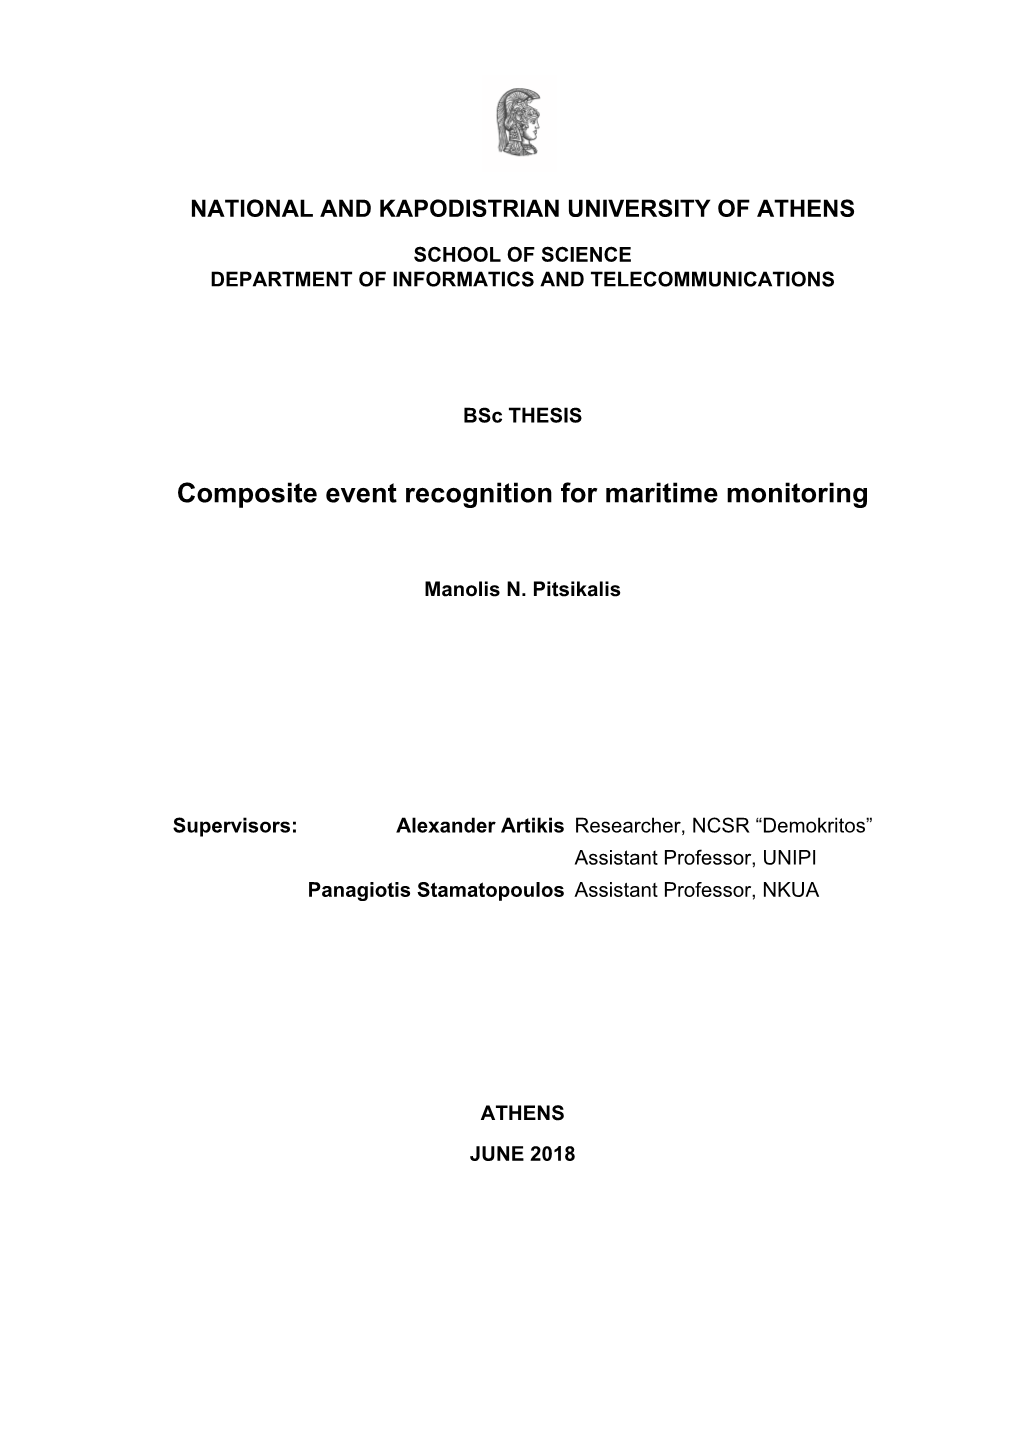 Composite Event Recognition for Maritime Monitoring